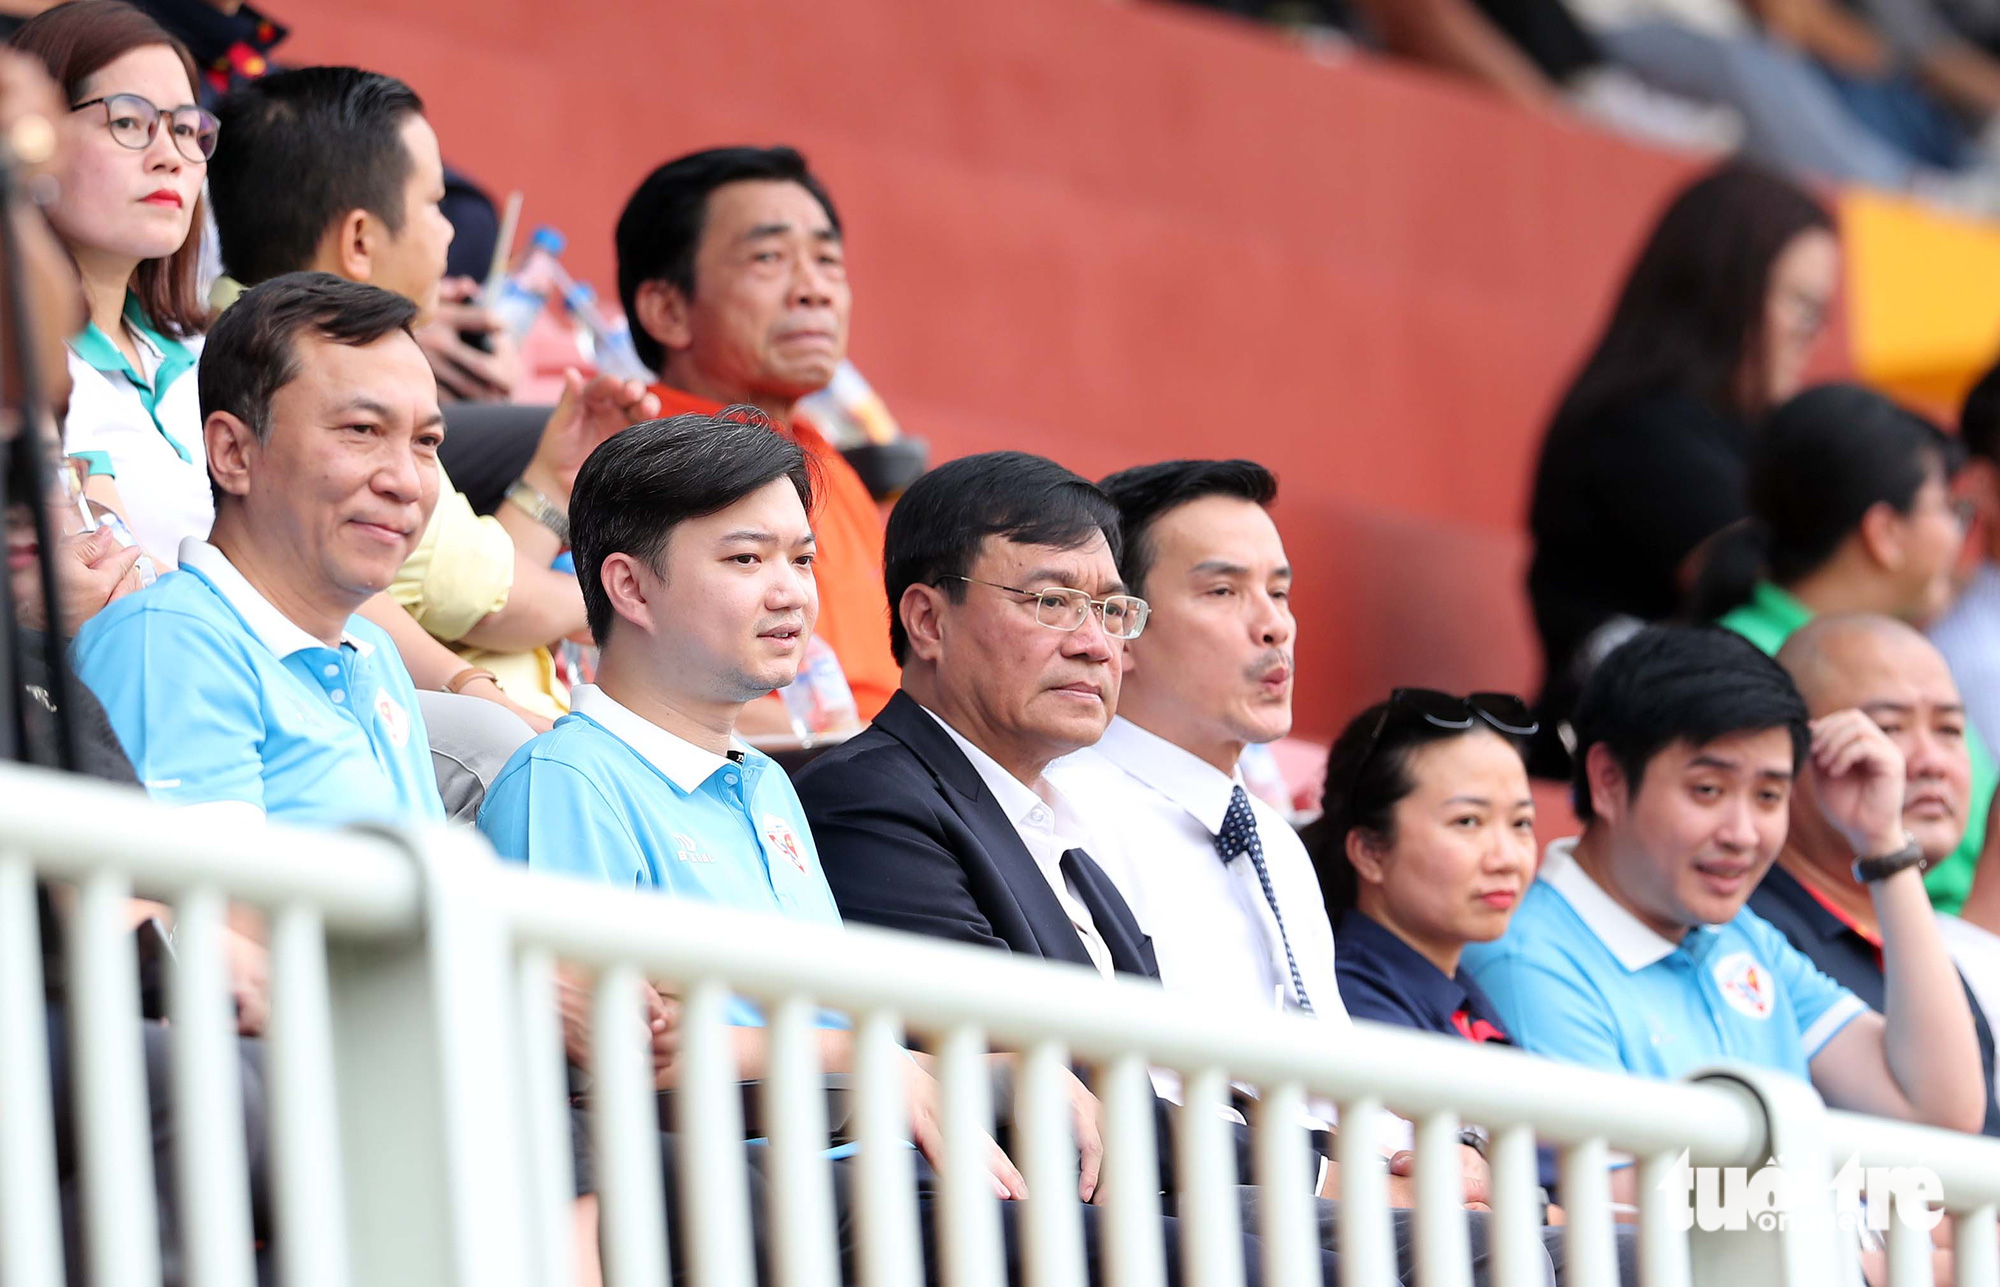 Secretary of the Central Committee of the Ho Chi Minh Communist Youth Union Nguyen Minh Triet (L, 2nd), head of the General Department of Physical Education and Sports Dang Ha Viet (black suit), and VFF President Tran Quoc Tuan (L) attend the qualifying round of the first Vietnam Student Football Tournament - Café de Mang Den Cup in Ho Chi Minh City, February 18, 2023. Photo: N.K. / Tuoi Tre